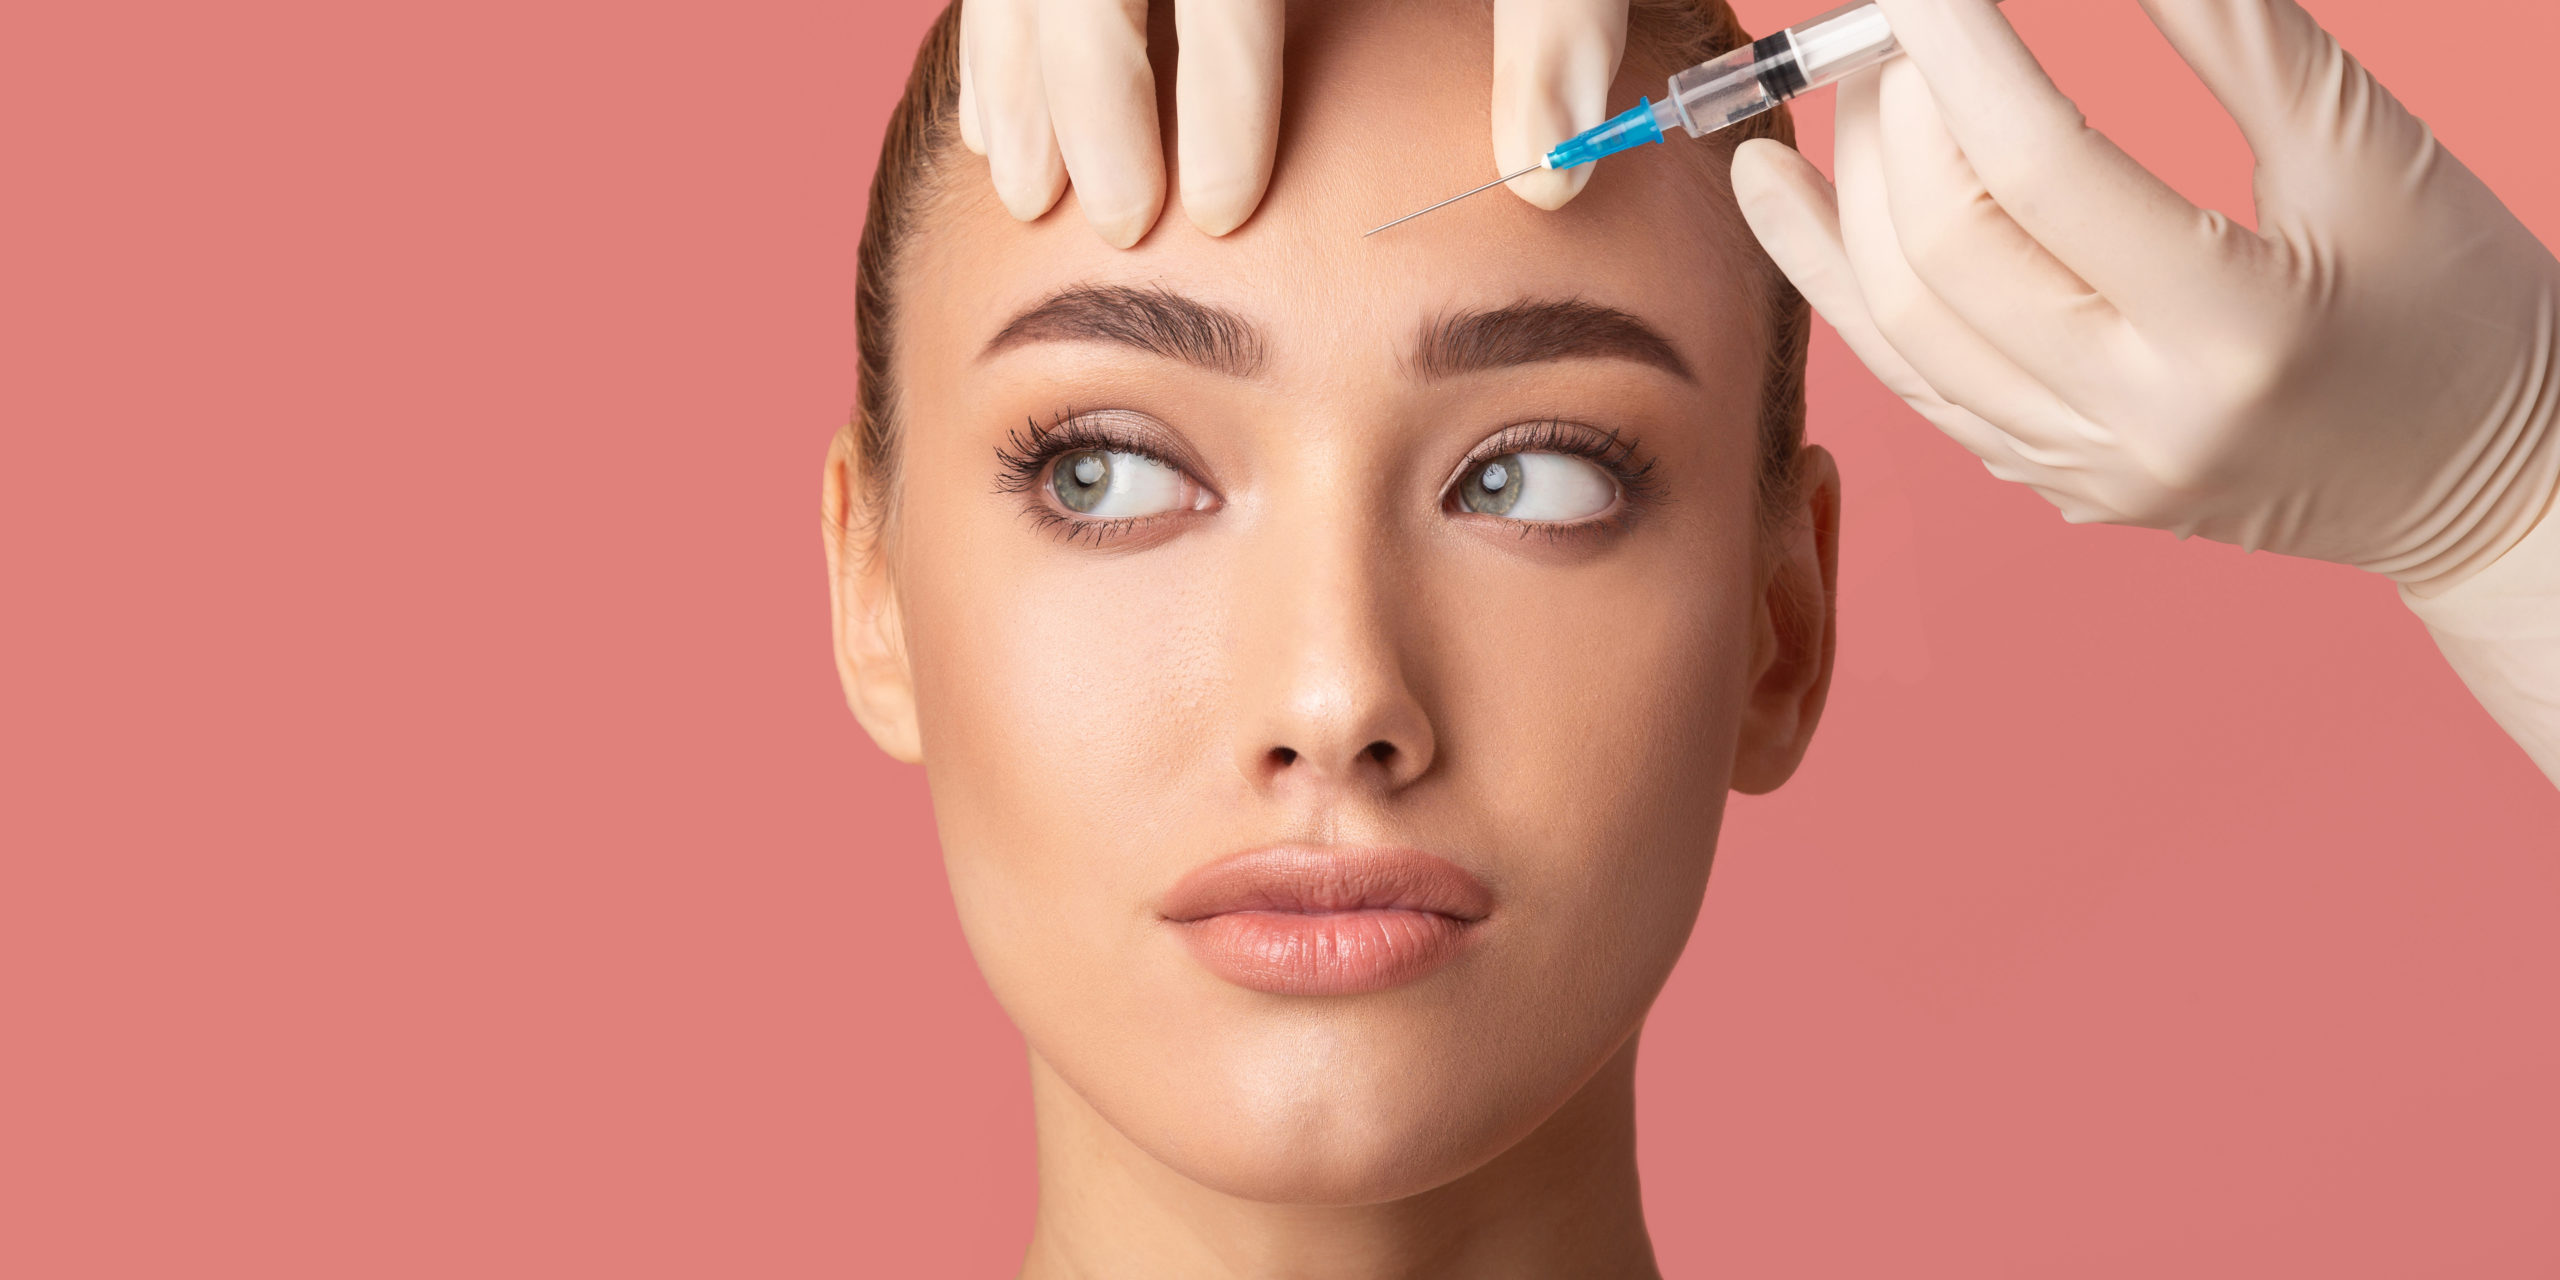 Botox Injections For The Face